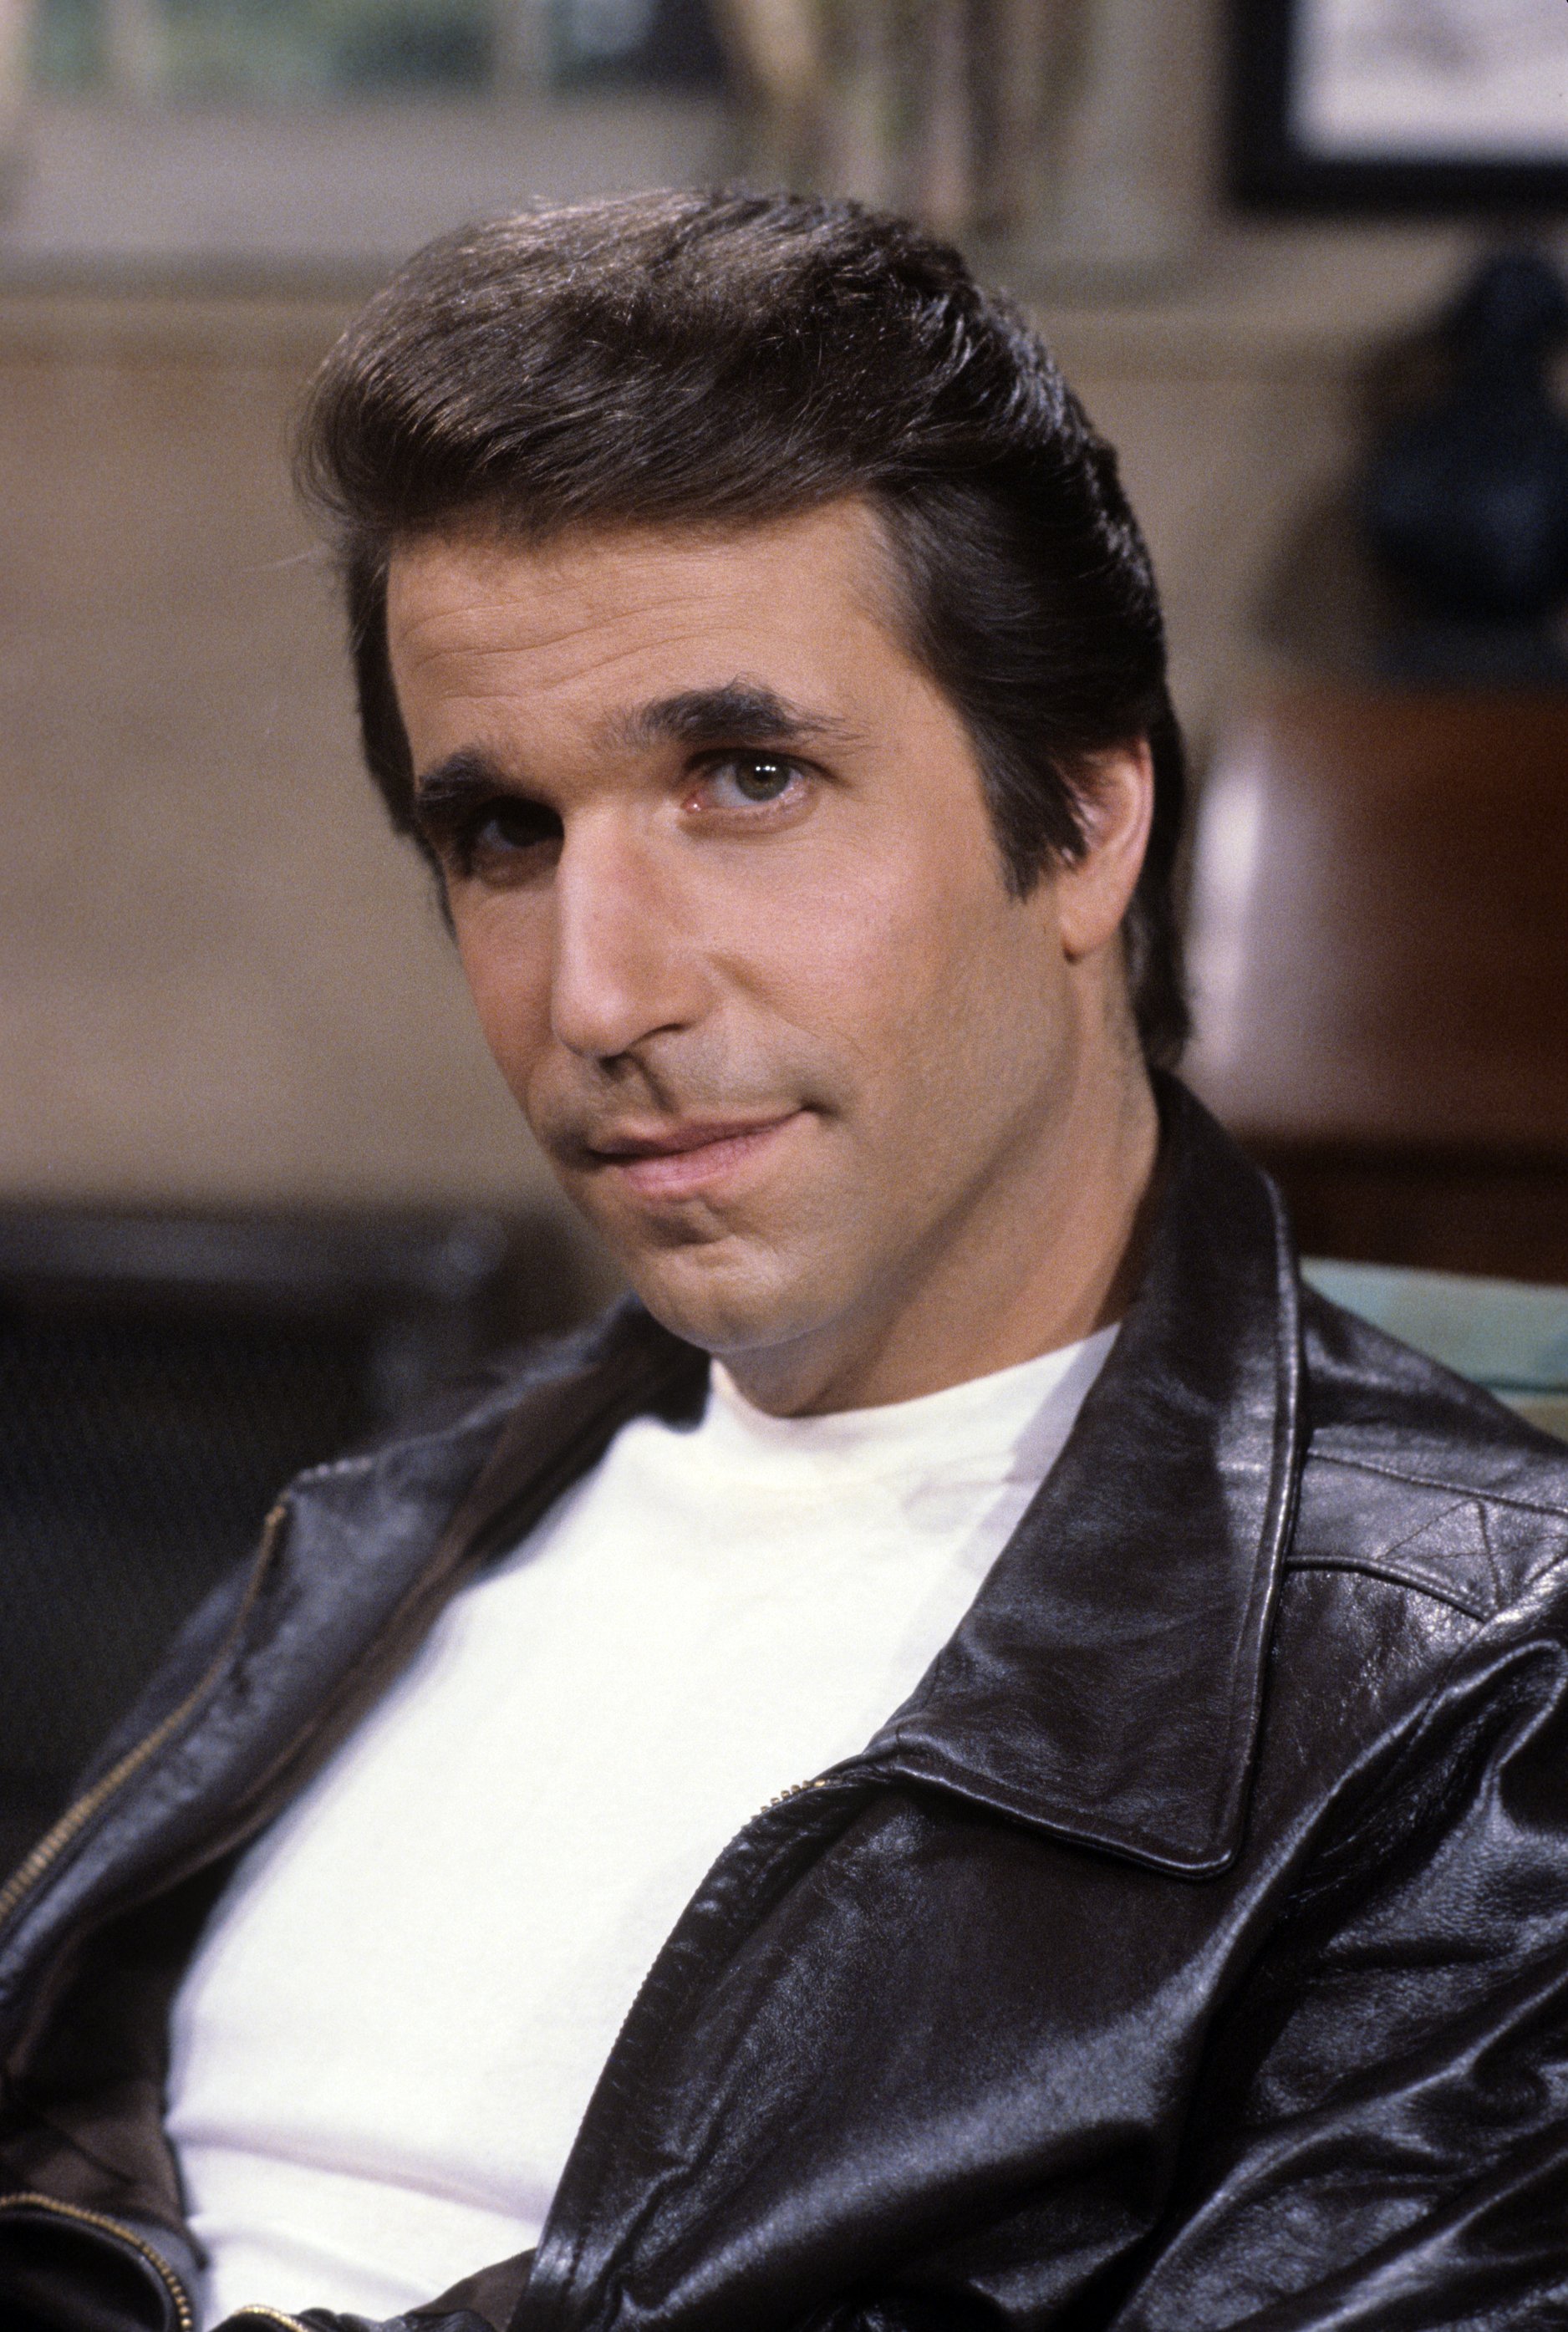 Henry Winkler on the set of "Happy Days" in 1981. | Source: Getty Images